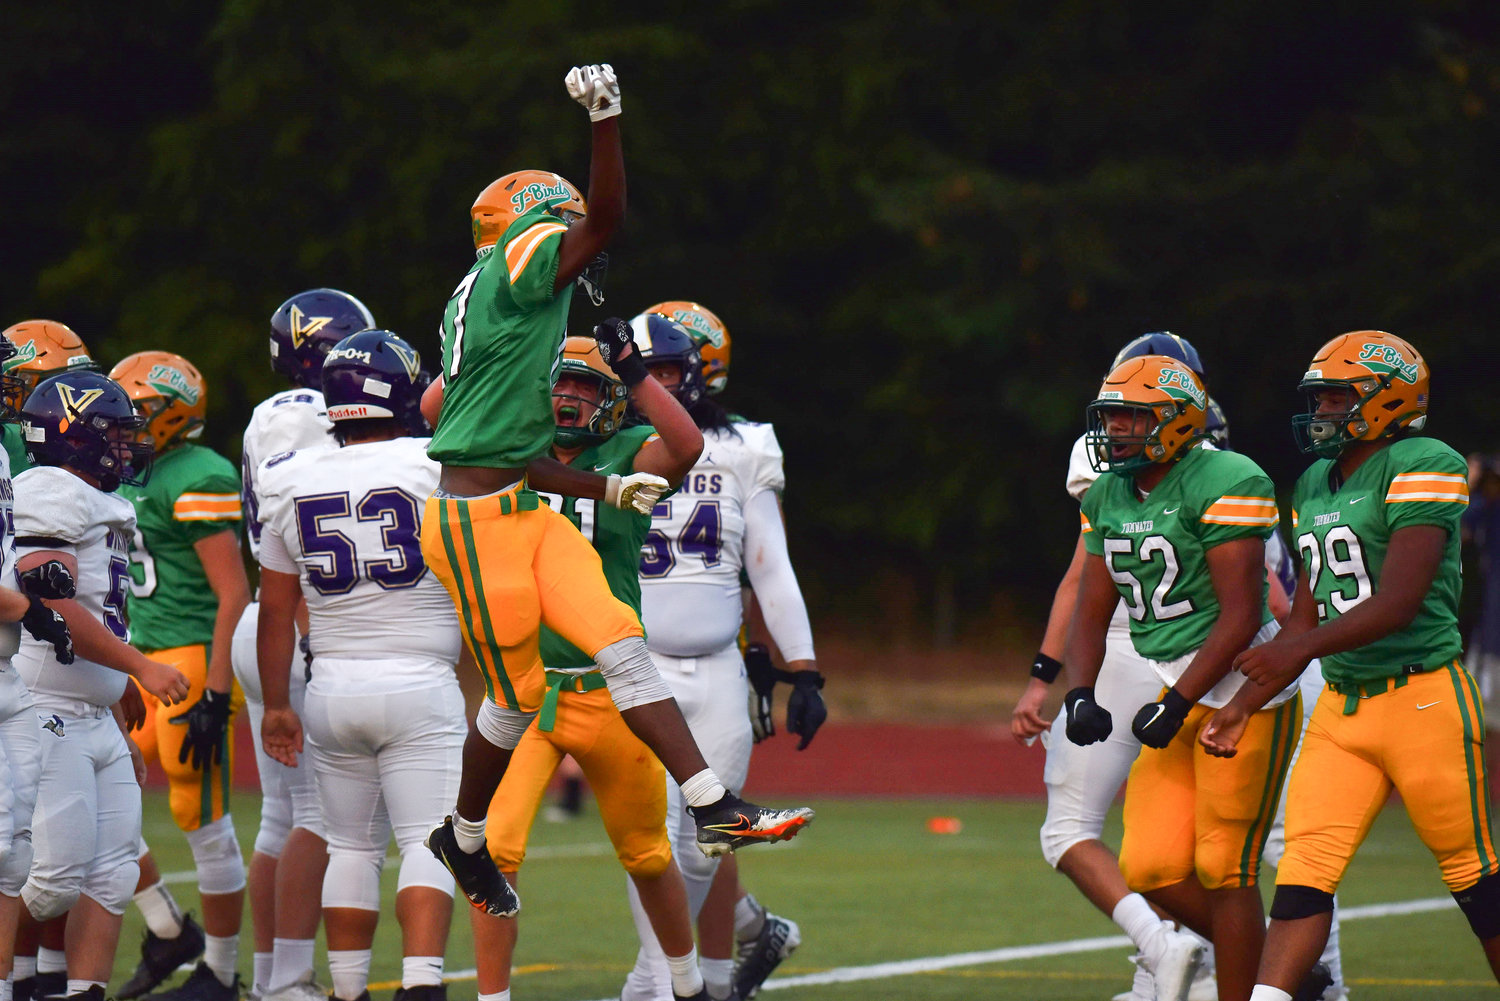 Tumwater defensive back David Malroy celebrates a safety in the first quarter of Tumwater's 8-6 win over North Kitsap on Sept. 9 at Sid Otton Field.